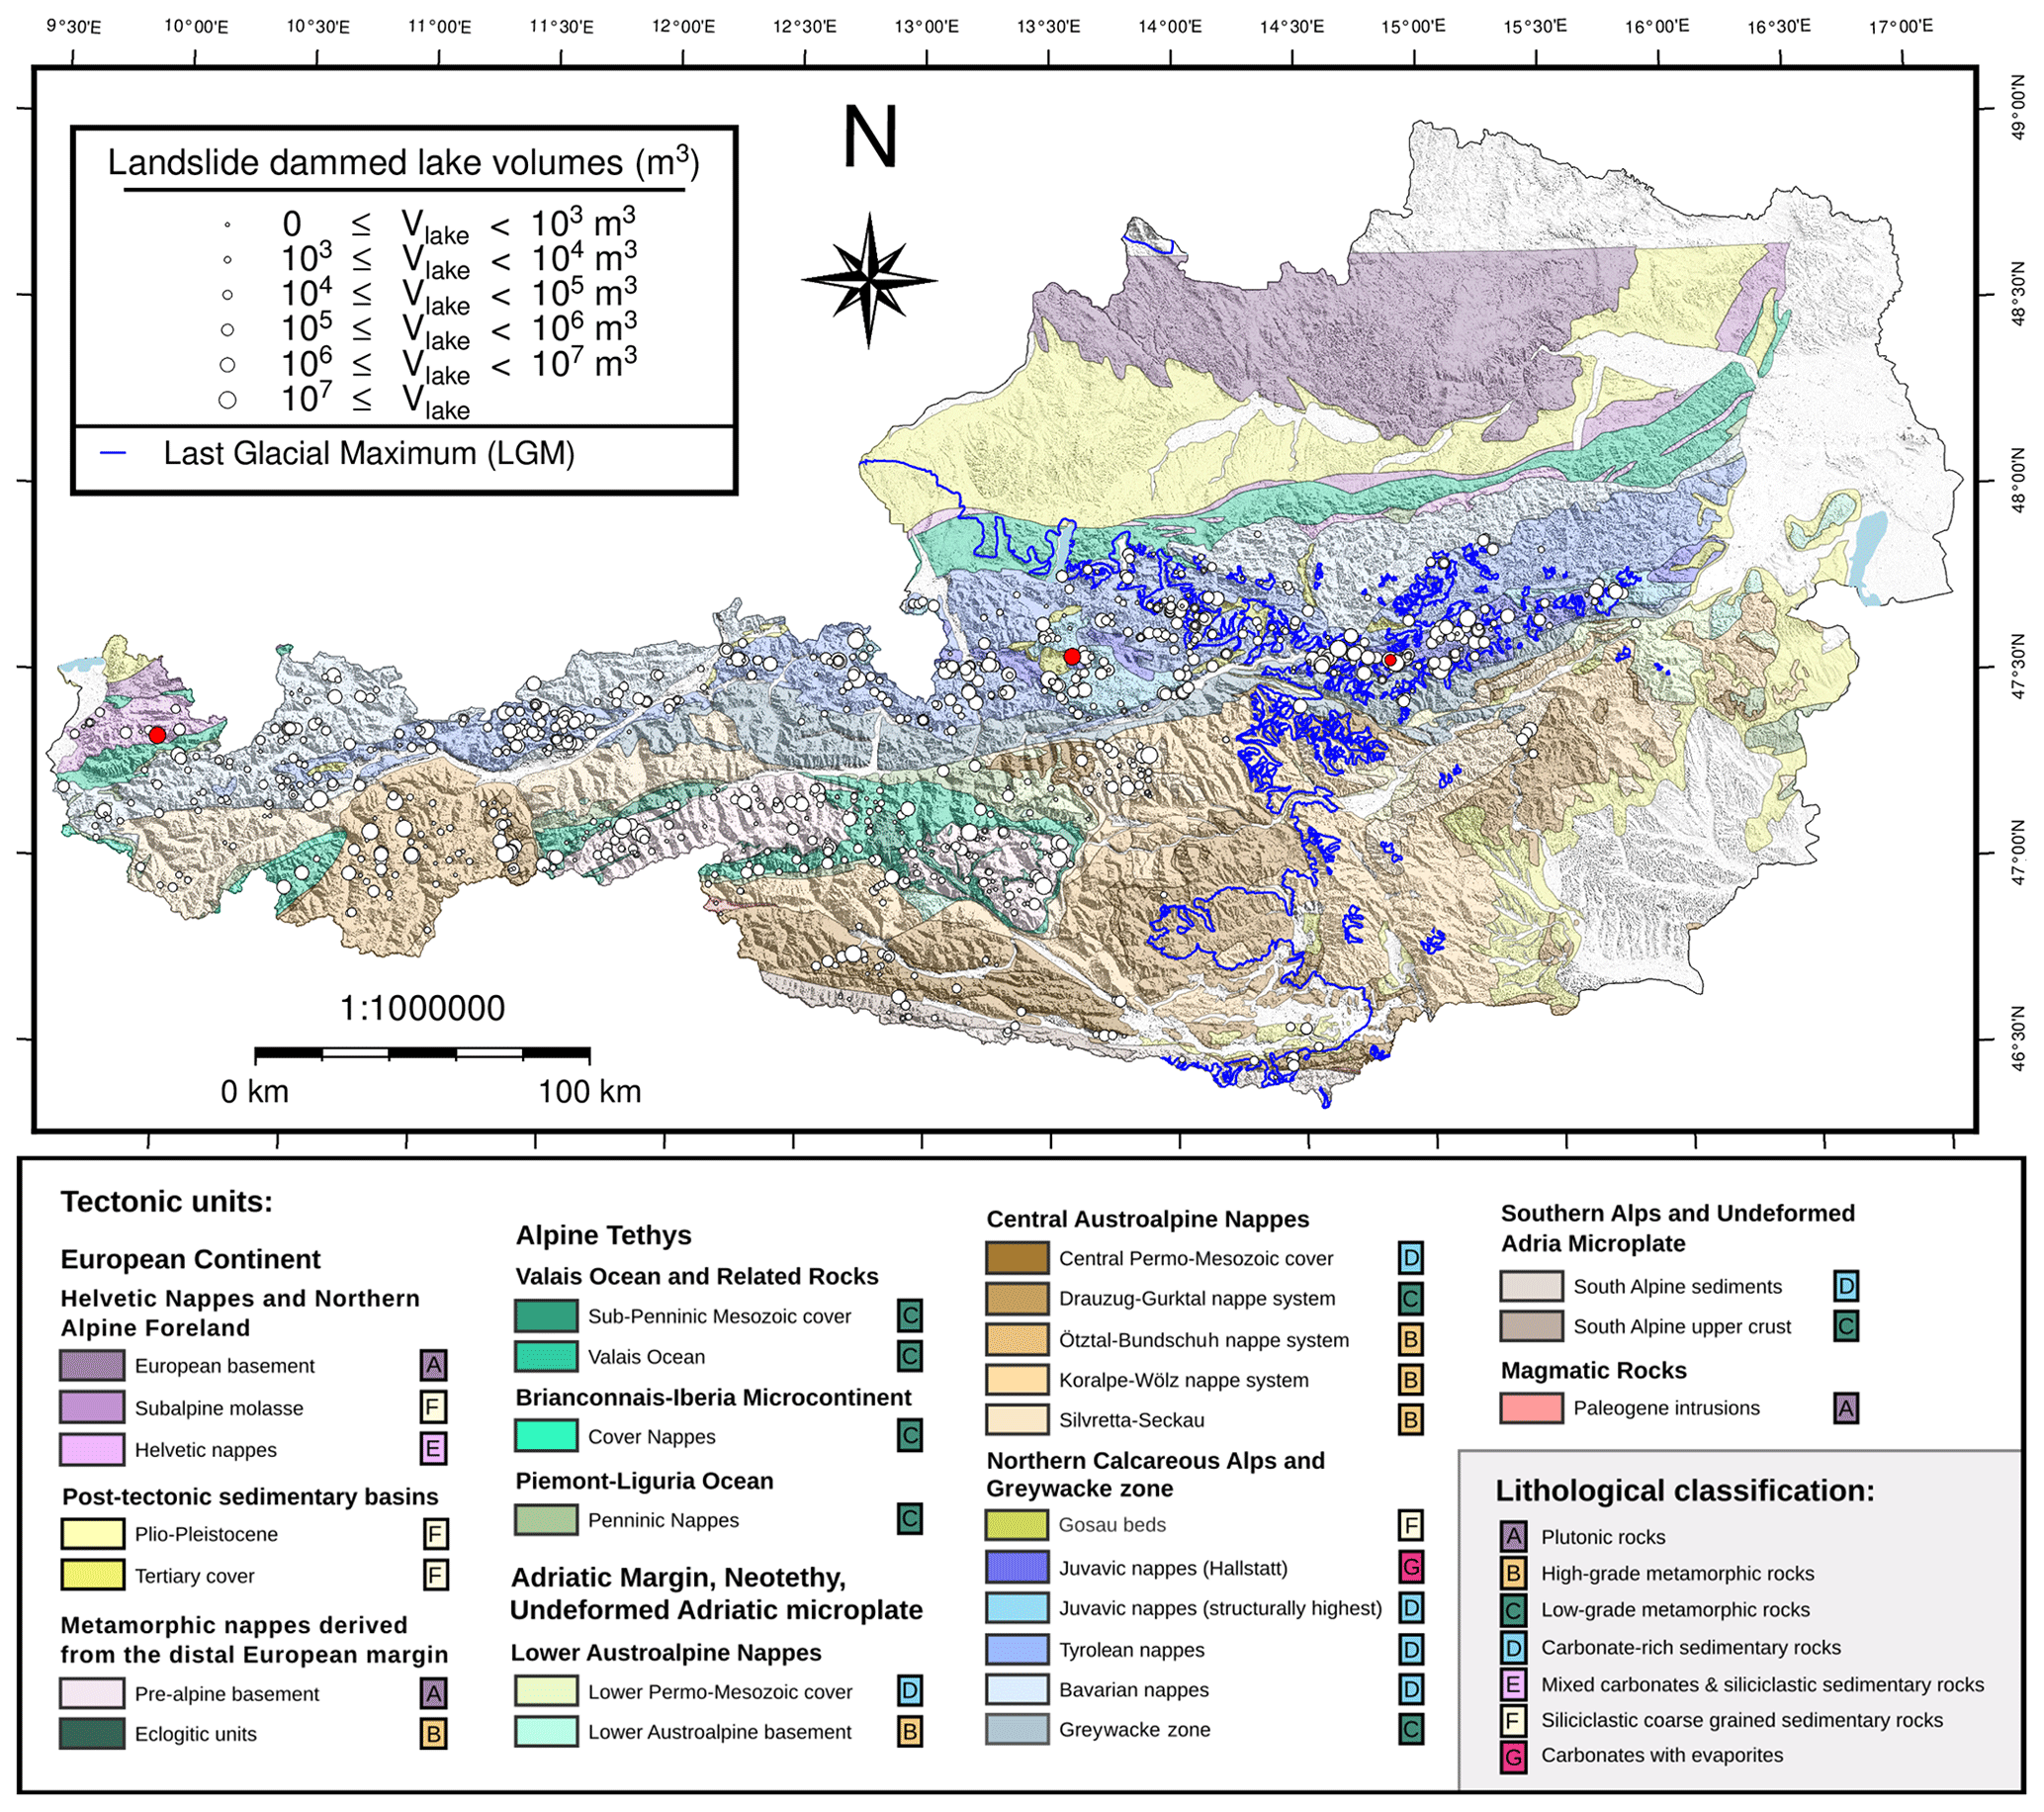 NHESS - Controls on the formation and size of potential landslide dams and  dammed lakes in the Austrian Alps